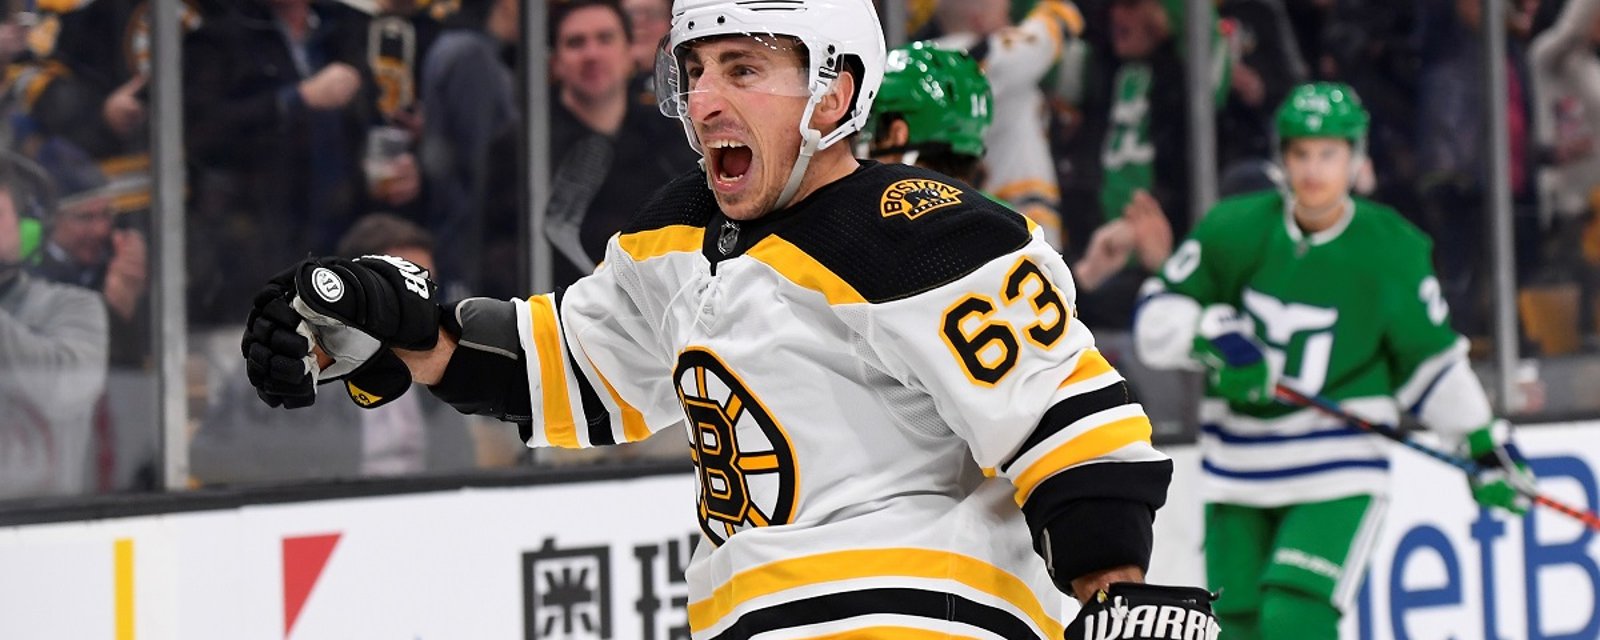 Brad Marchand responds to mean tweets from angry fans.